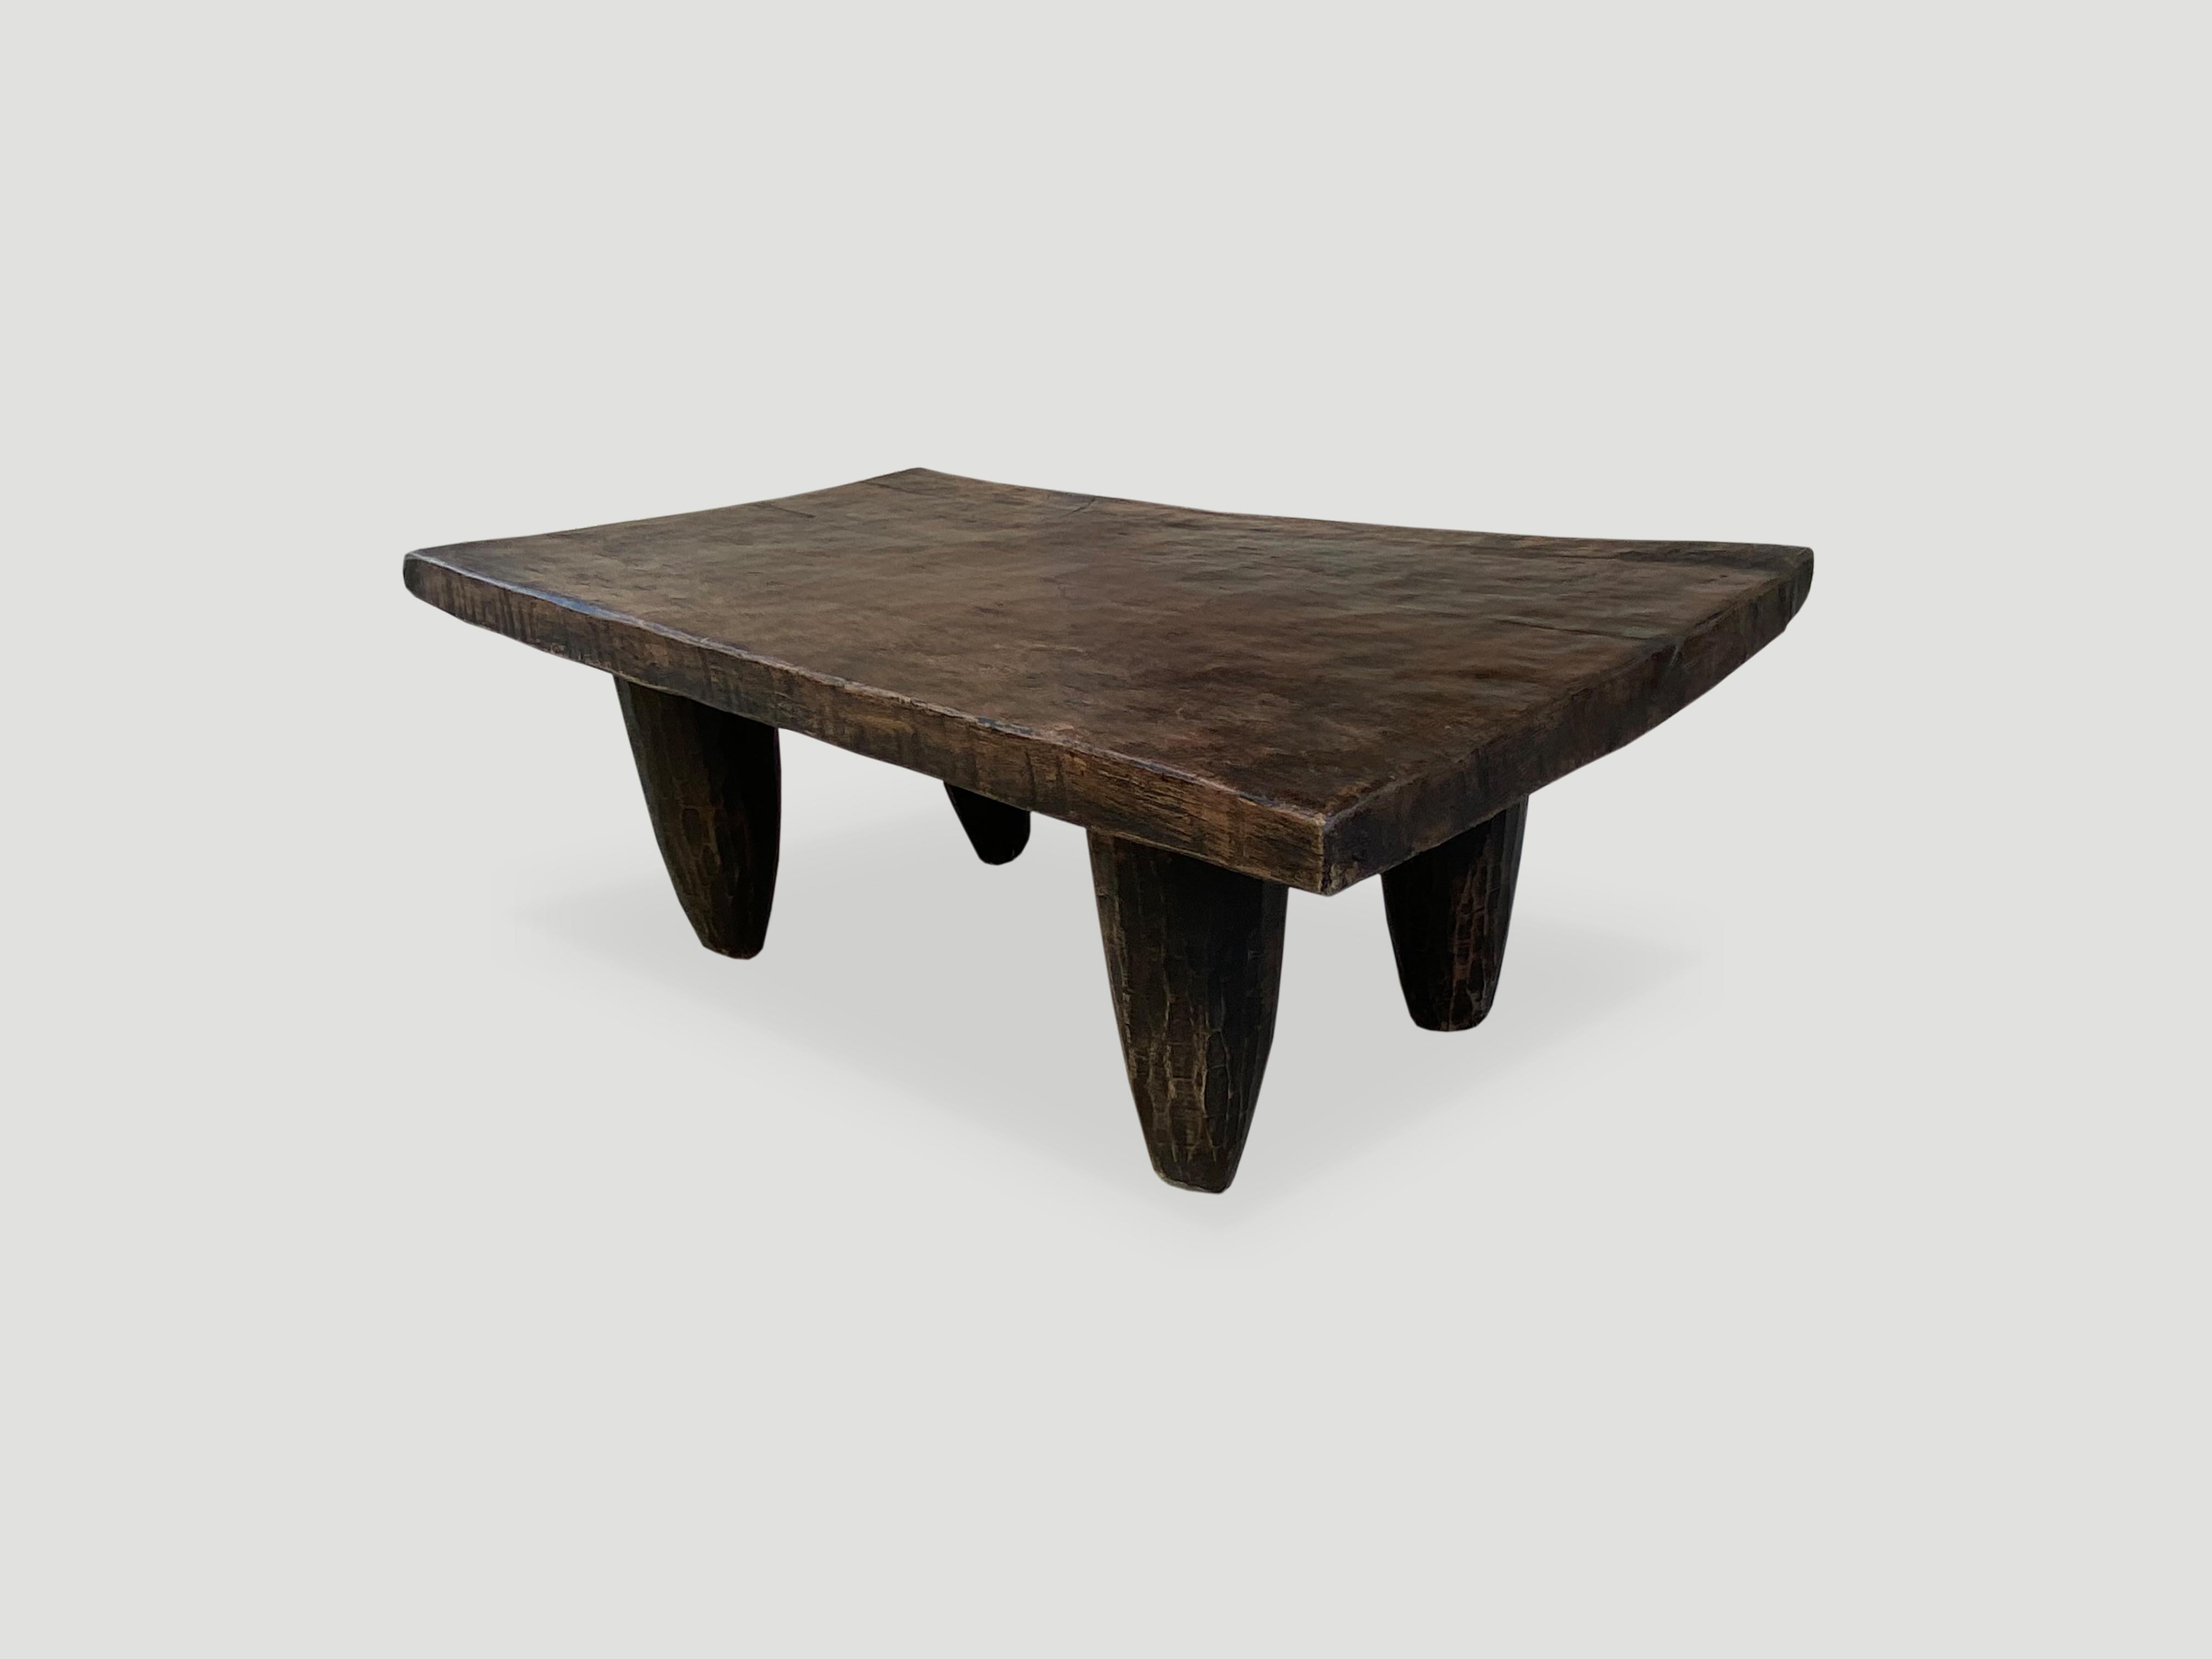 Antique bench or coffee table hand carved by the Senufo tribes from a single block of iroko wood, native to the west coast of Africa. The wood is tough, dense and very durable. Shown with cone style legs. We only source the best. 

This bench or